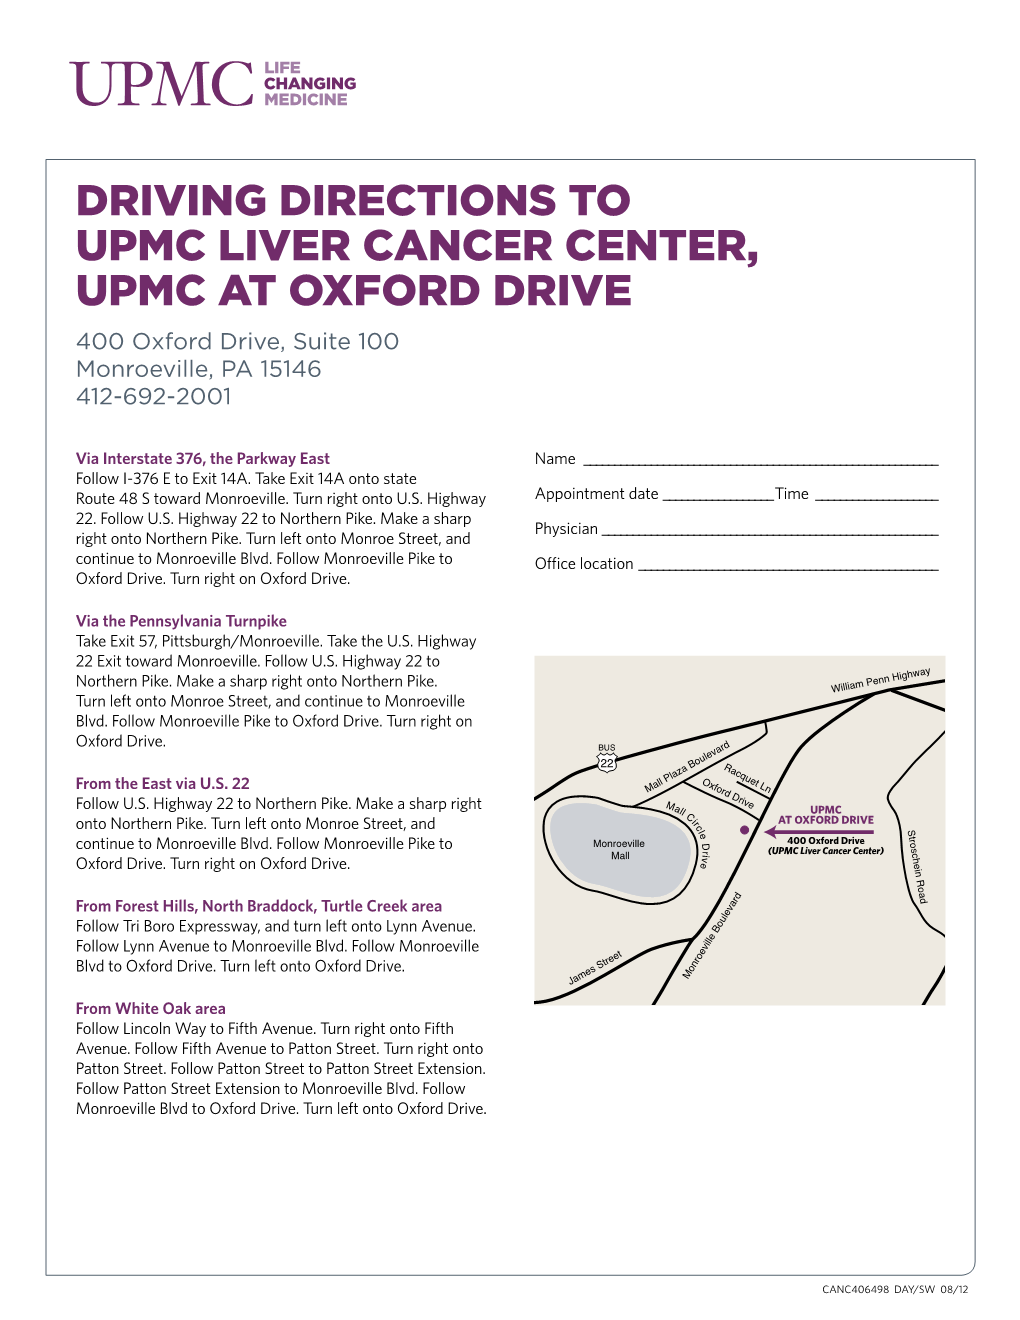 DRIVING DIRECTIONS to UPMC LIVER CANCER CENTER, UPMC at OXFORD DRIVE 400 Oxford Drive, Suite 100 Monroeville, PA 15146 412-692-2001